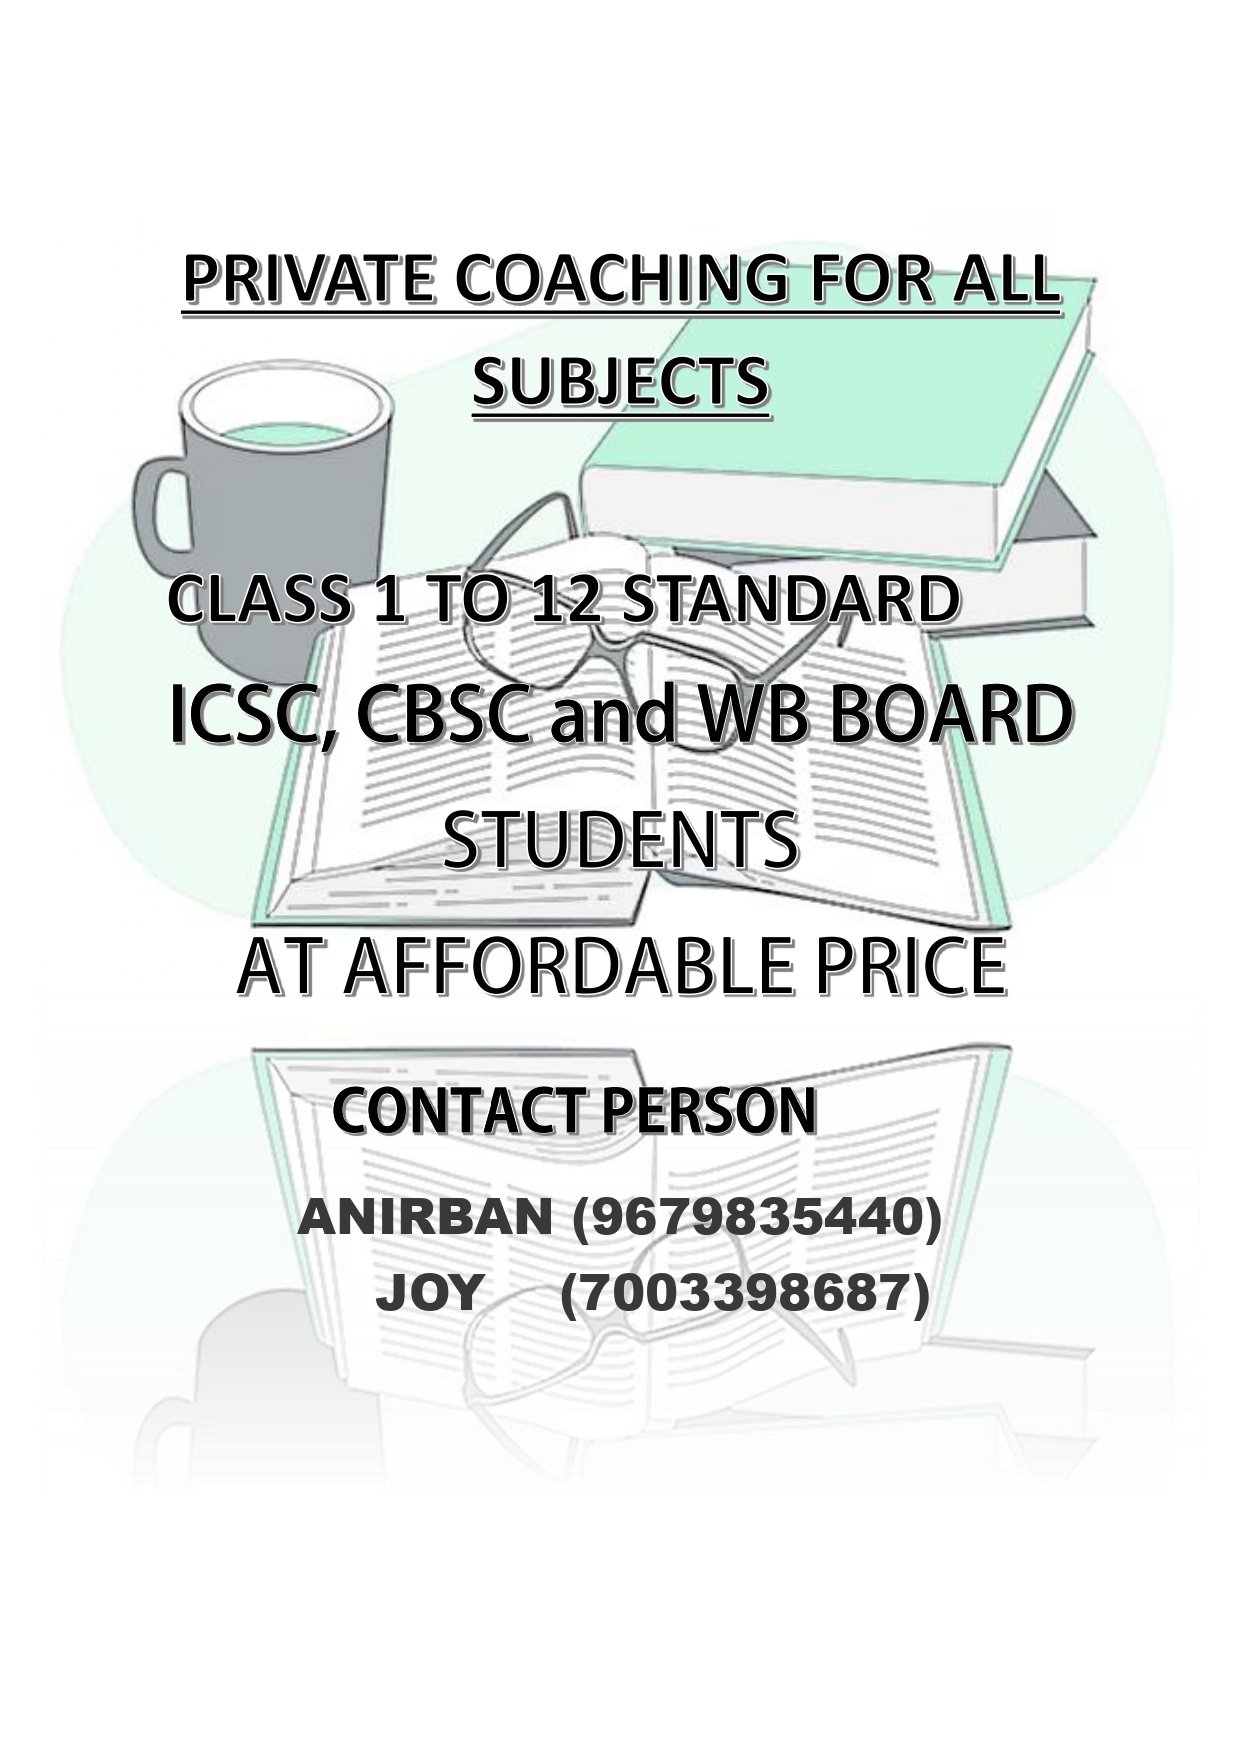 Class 11th/ 12th Tuition, Class 9th/ 10th Tuition, Elementary (Class 1 - 5 Tuition), Middle Class (6th -8th) Tuition, Primary Class Tuition